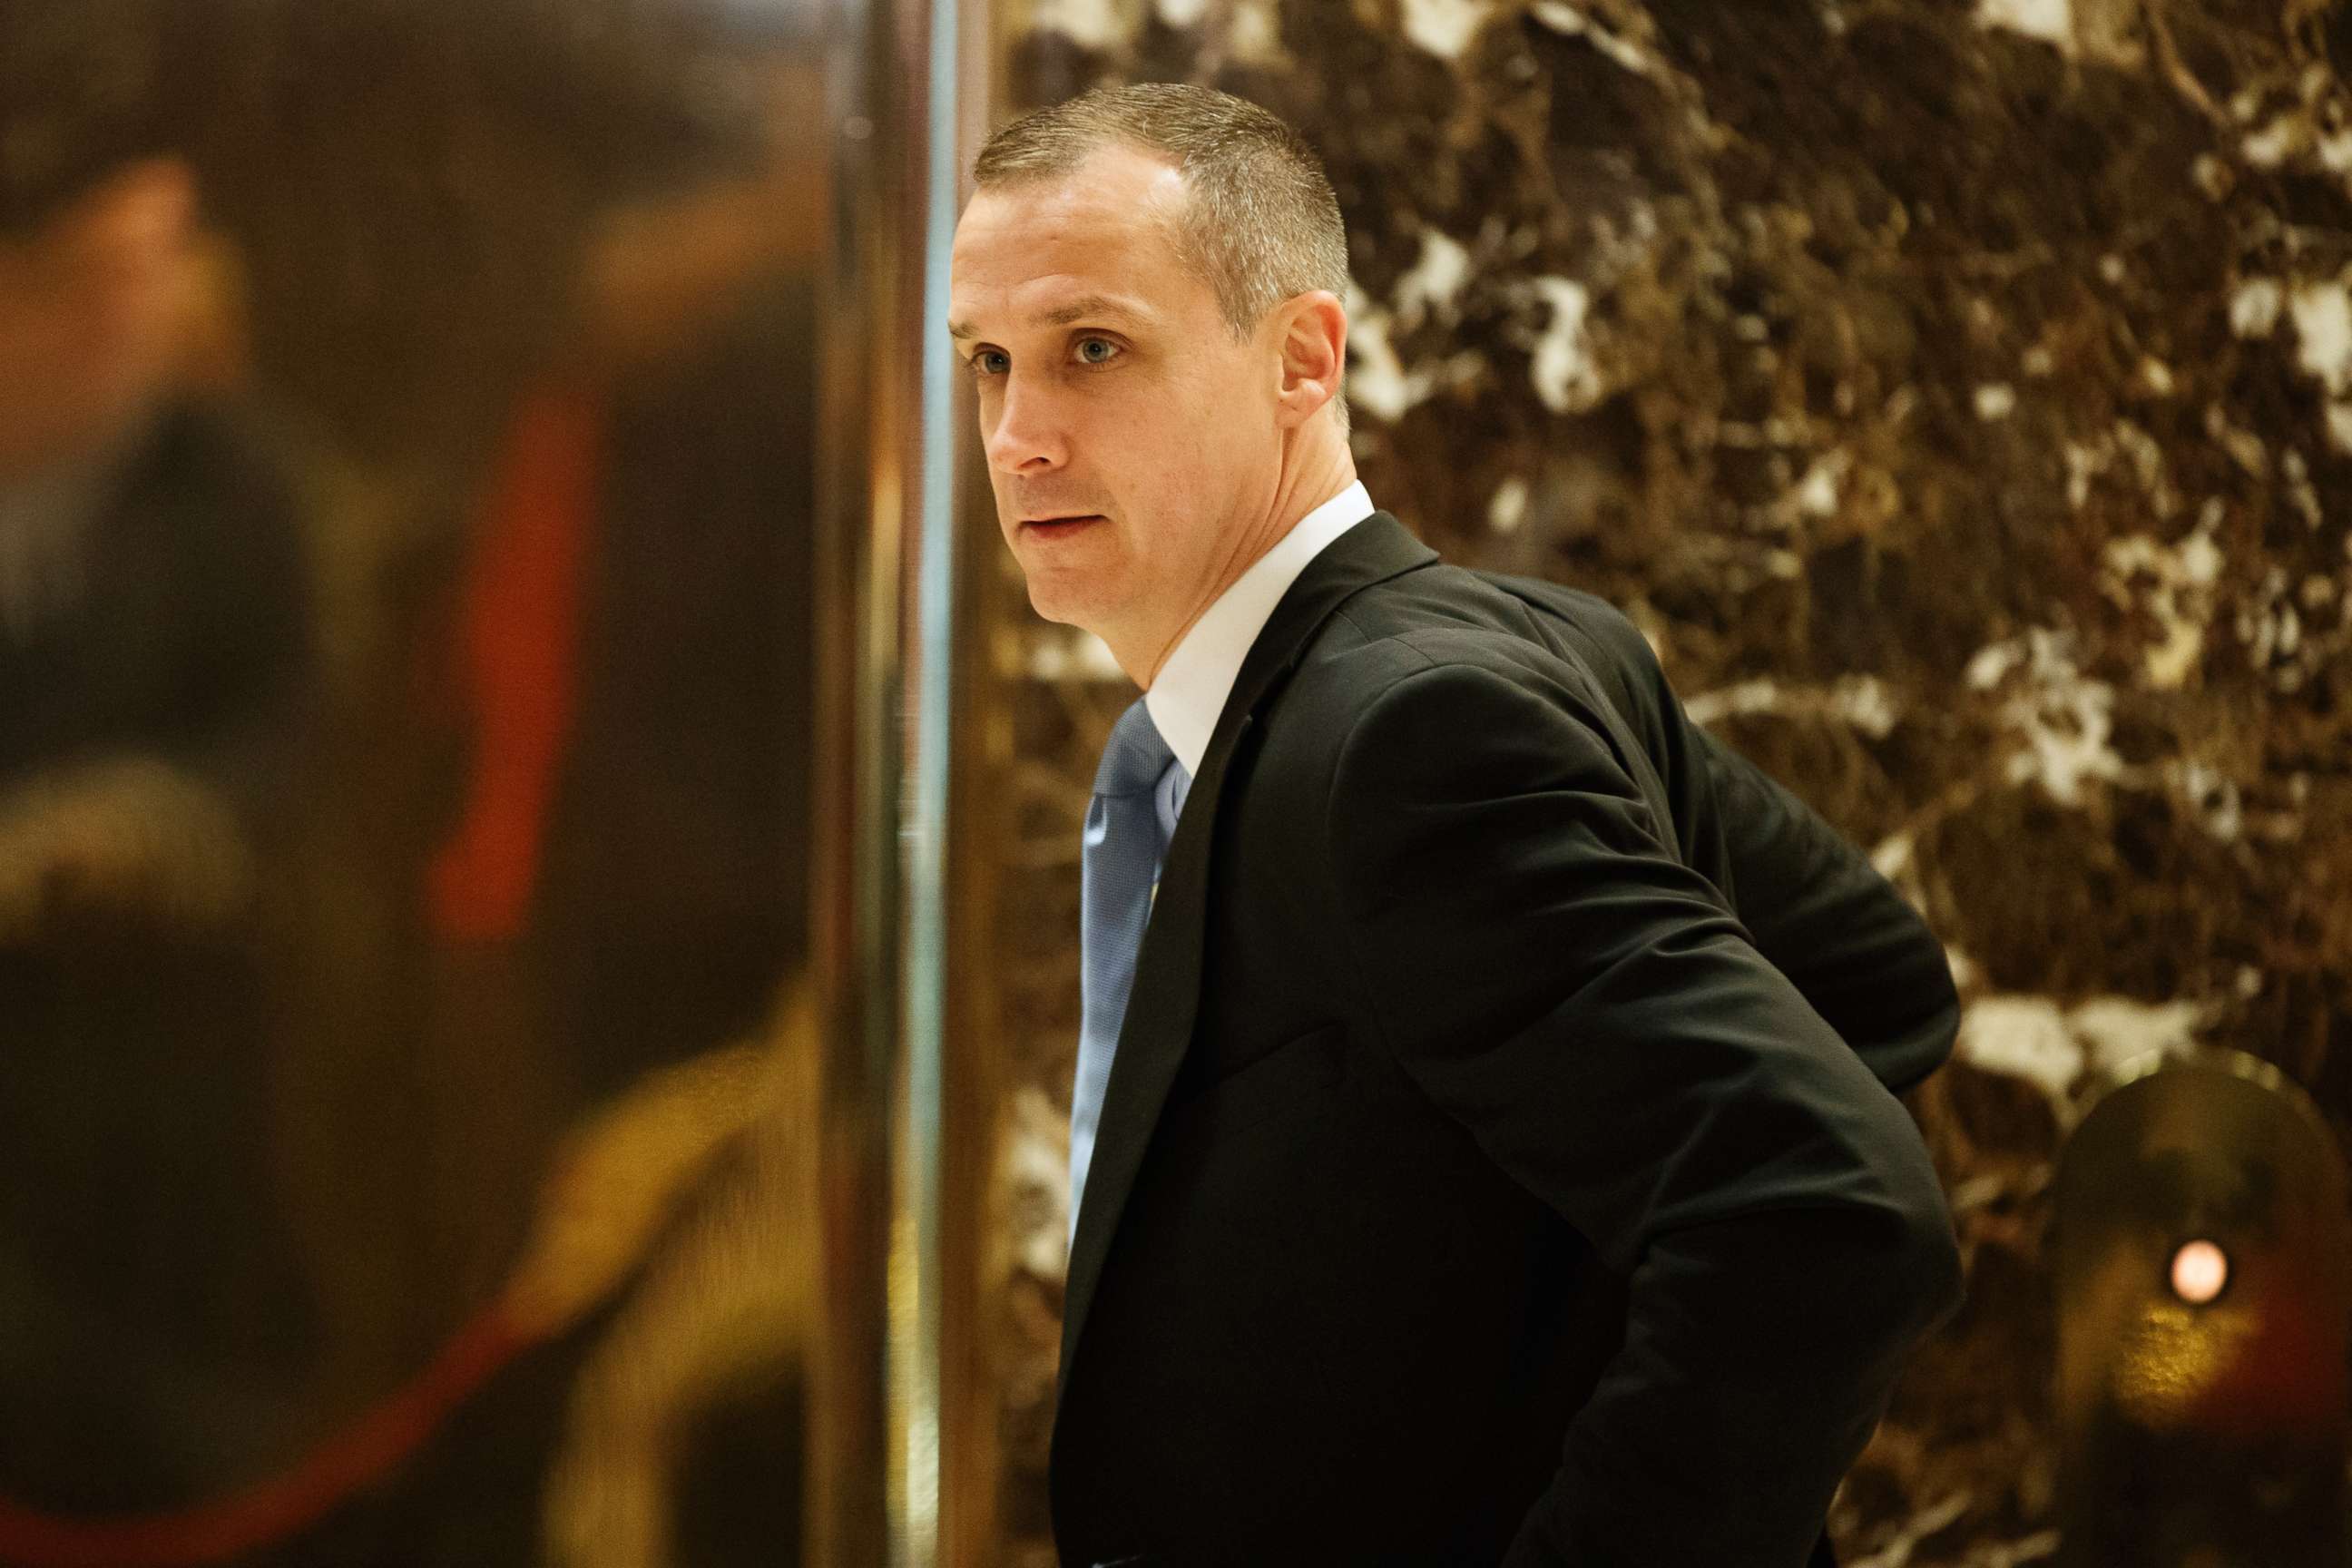 PHOTO: Corey Lewandowski, former campaign manager for President-elect Donald Trump, talks with reporters as he arrives at Trump Tower, Nov. 29, 2016, in New York.